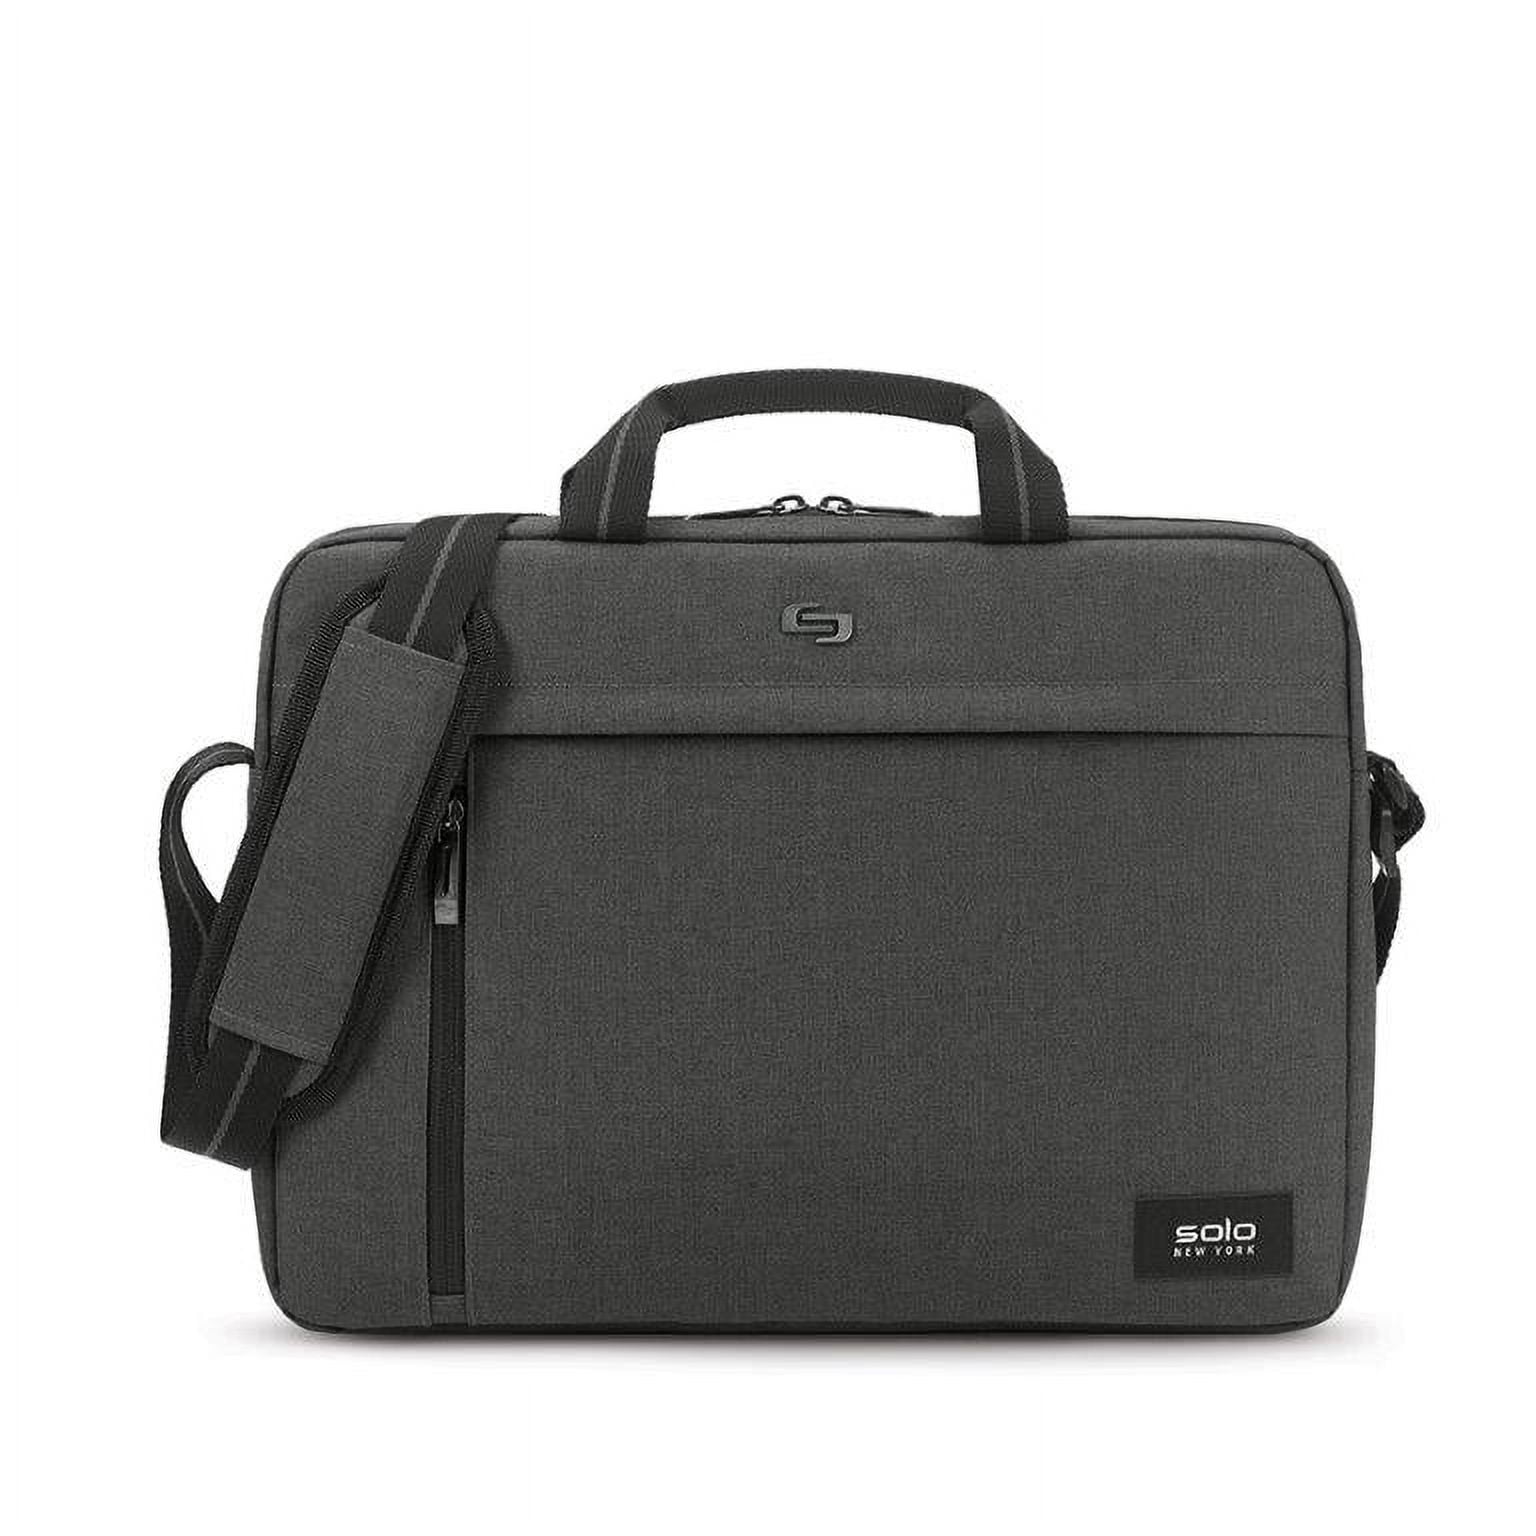 Lenovo B510-ROW Carrying Case (Backpack) for 15.6 Notebook - Water  Resistant, Tear Resistant - Shoulder Strap